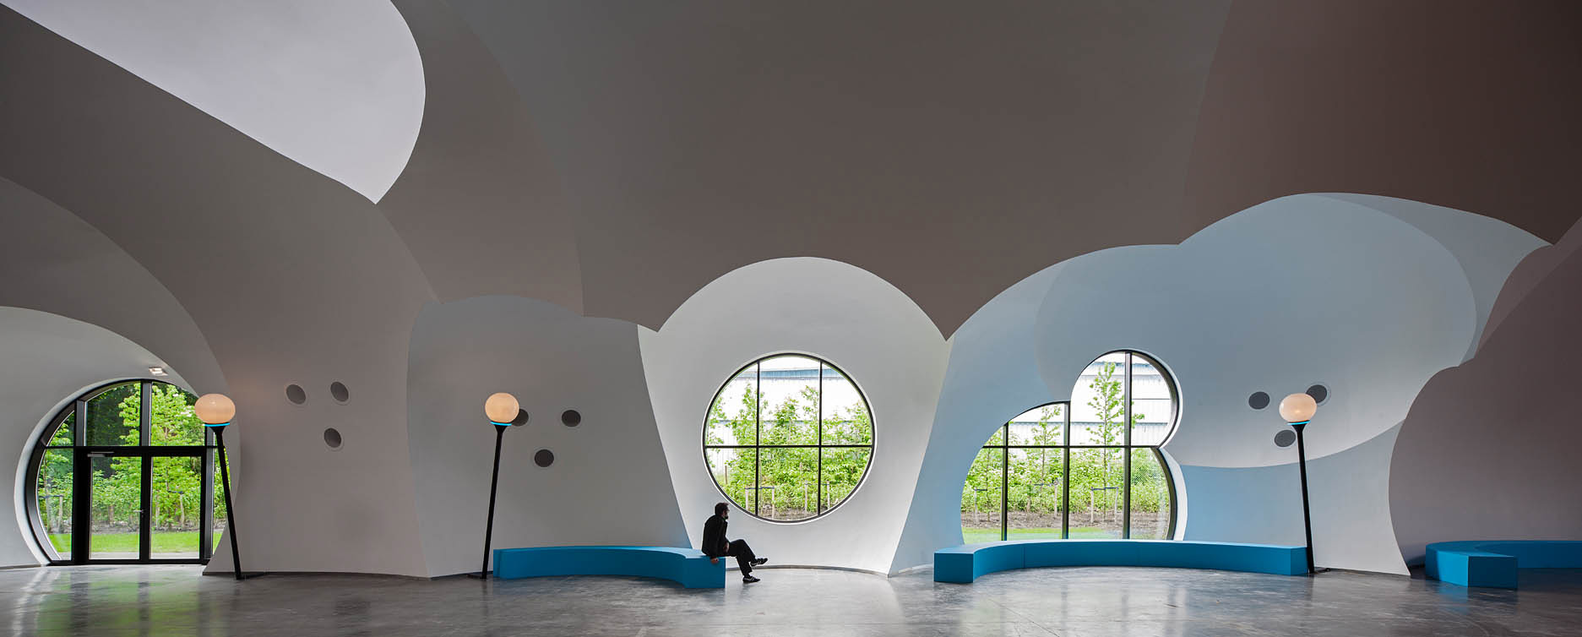 SUSTAINABLE ARCHITECTURE: The design plays with the bubbles to create windows and skylights. Photo: carlosarroyo.net